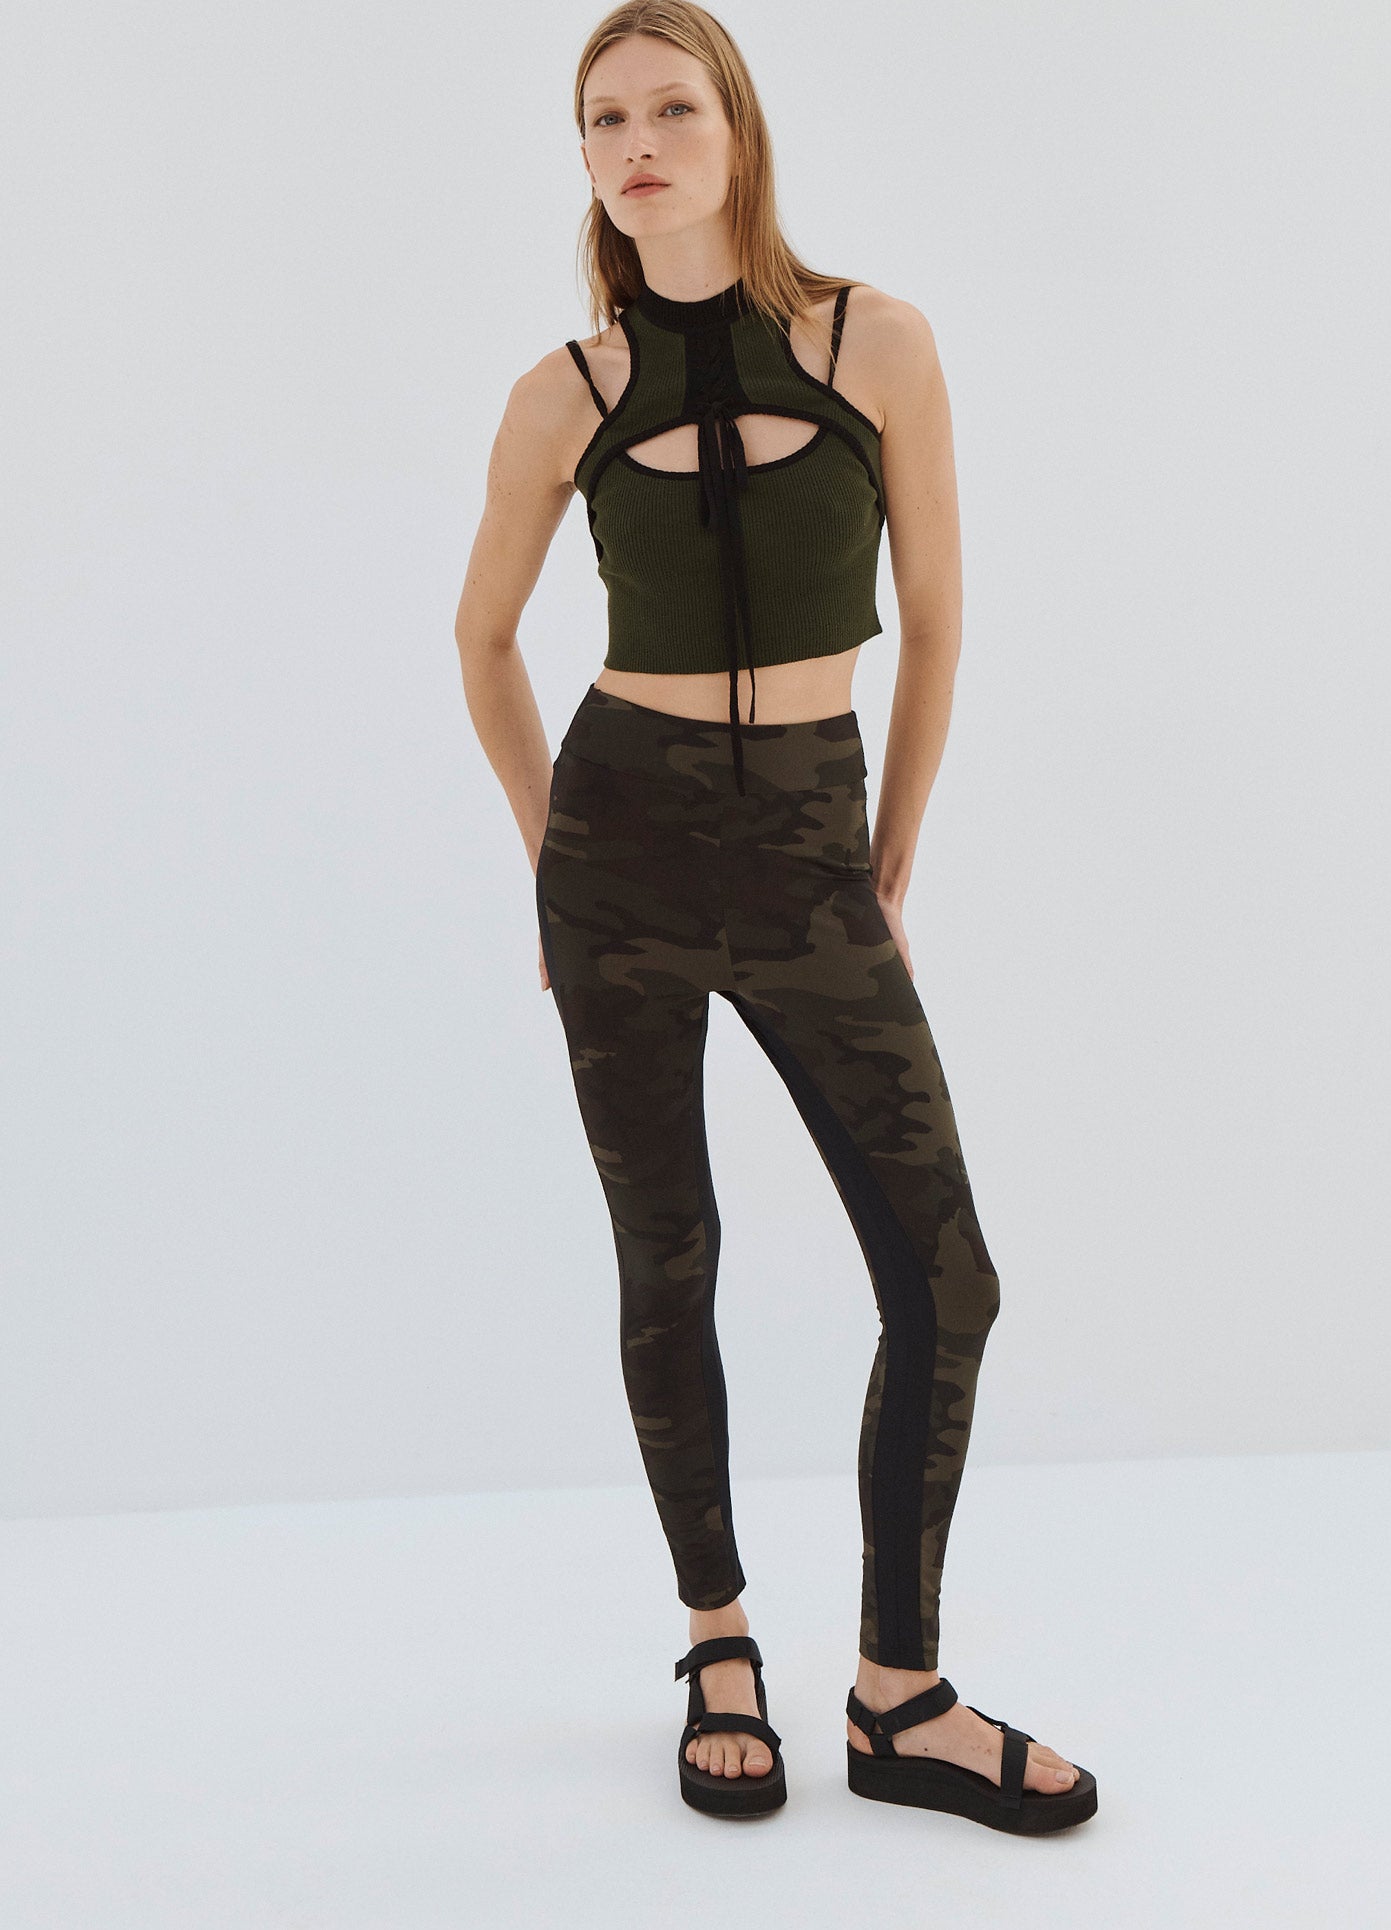 MONSE Halter Neck Knit Top in Olive on Model Full Front View